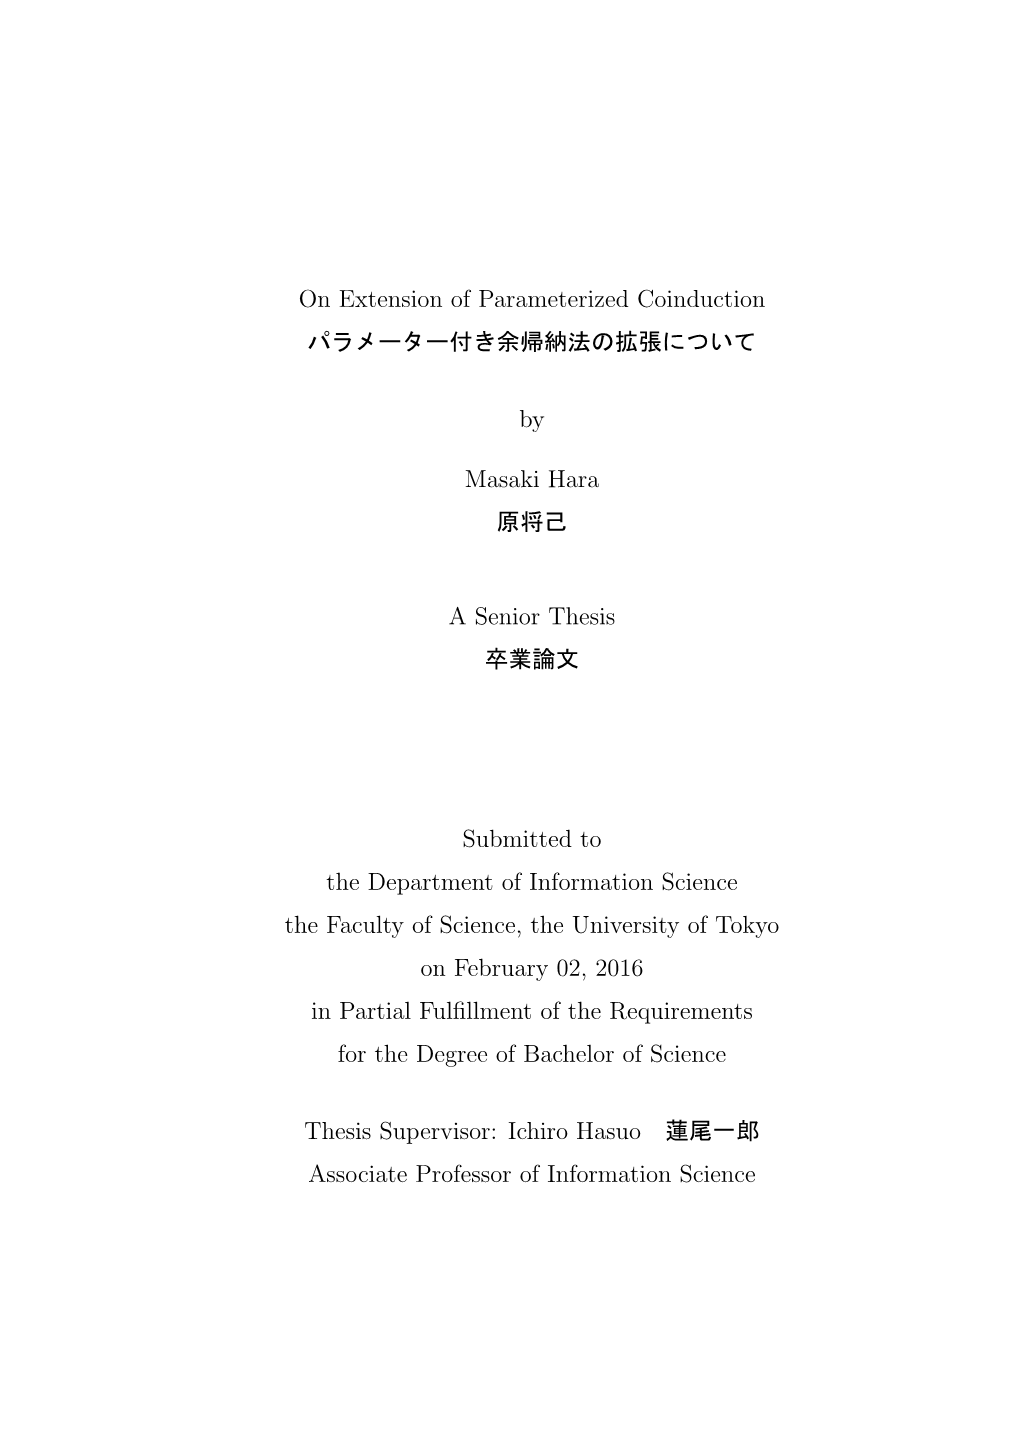 On Extension of Parameterized Coinduction by Masaki Hara A